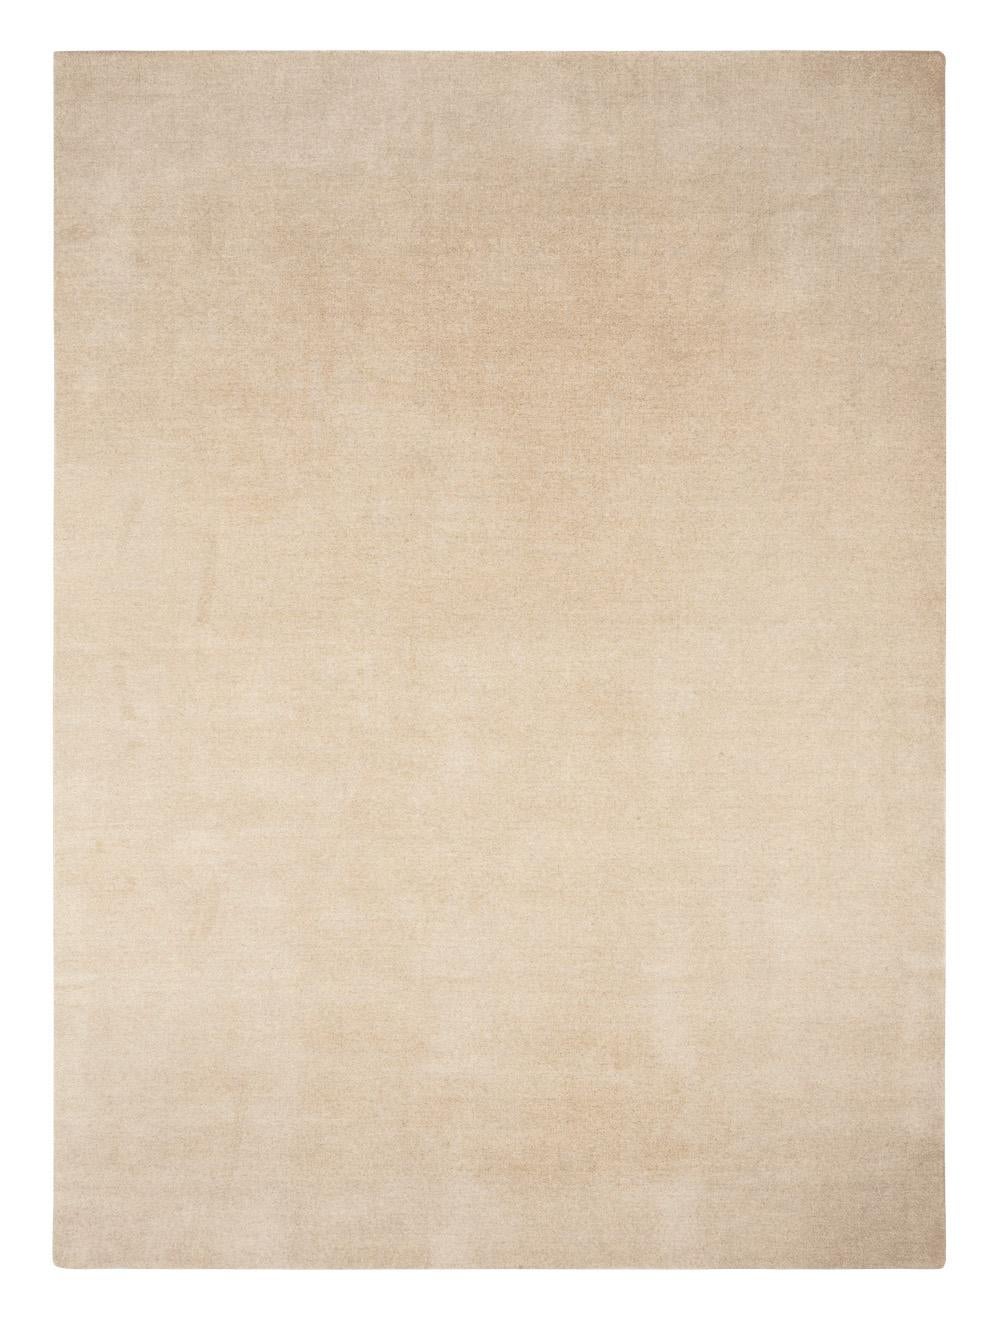 Light Beige Earth Natural Carpet by Massimo Copenhagen
Handwoven
Materials: 100% Undyed New Zealand Wool
Dimensions: W 300 x H 400 cm
Available colors: Ivory, Silver Grey, Light Beige, Light Grey, and Dark Grey.
Other dimensions are available: